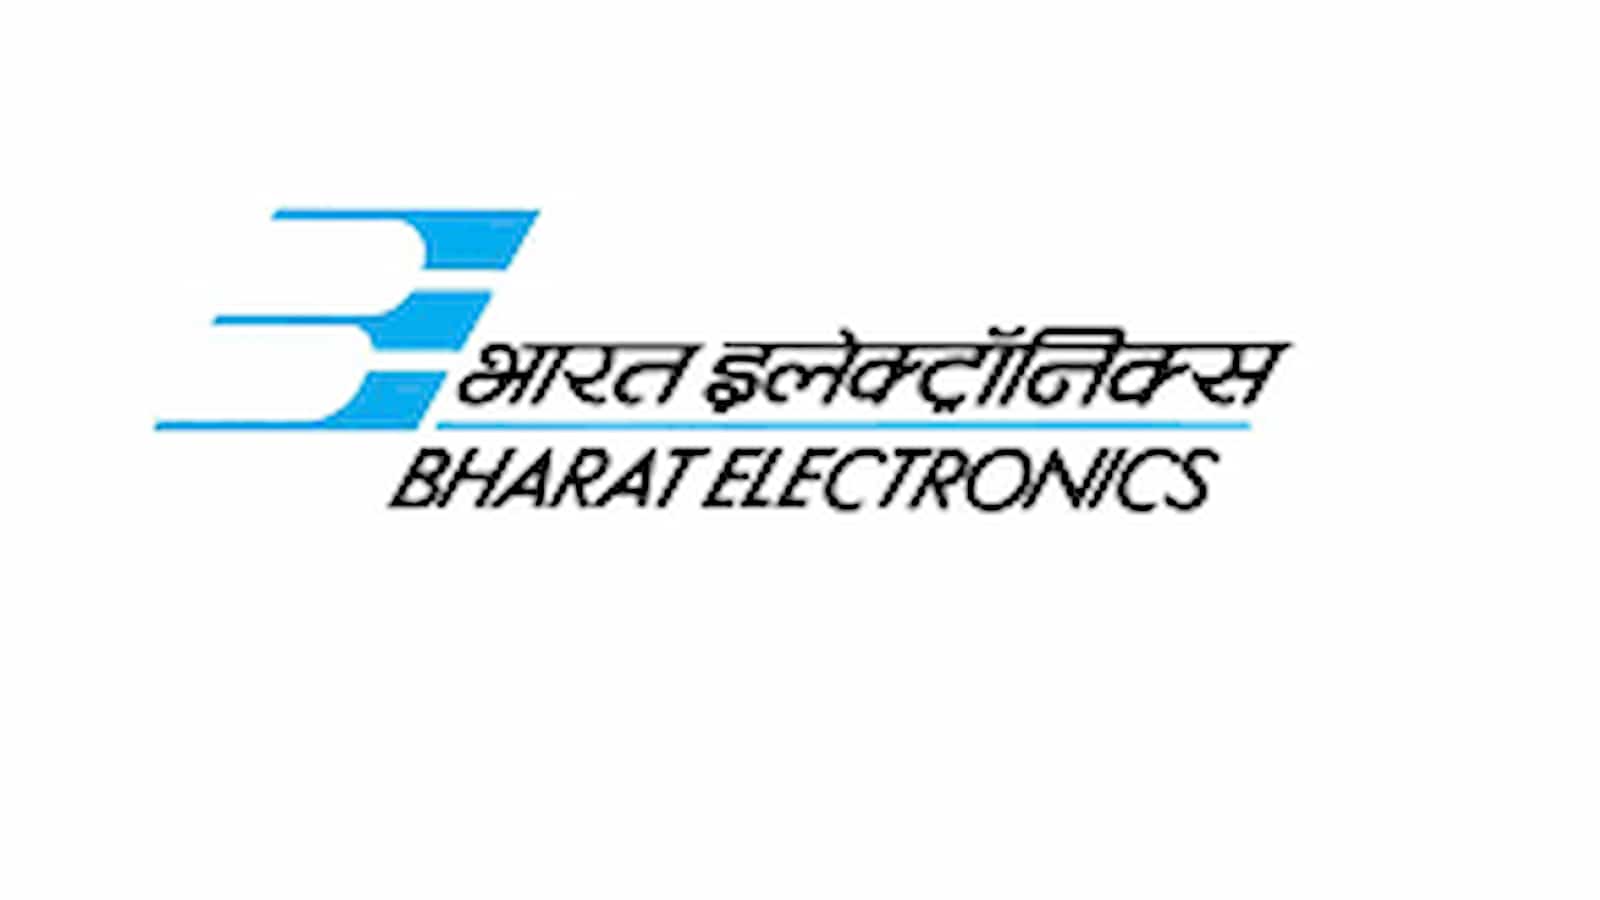 BEL eyes Rs 20,300 crore turnover in 2023-24 with push from indigenous products expected to drive growth, Bharat Electronics shares